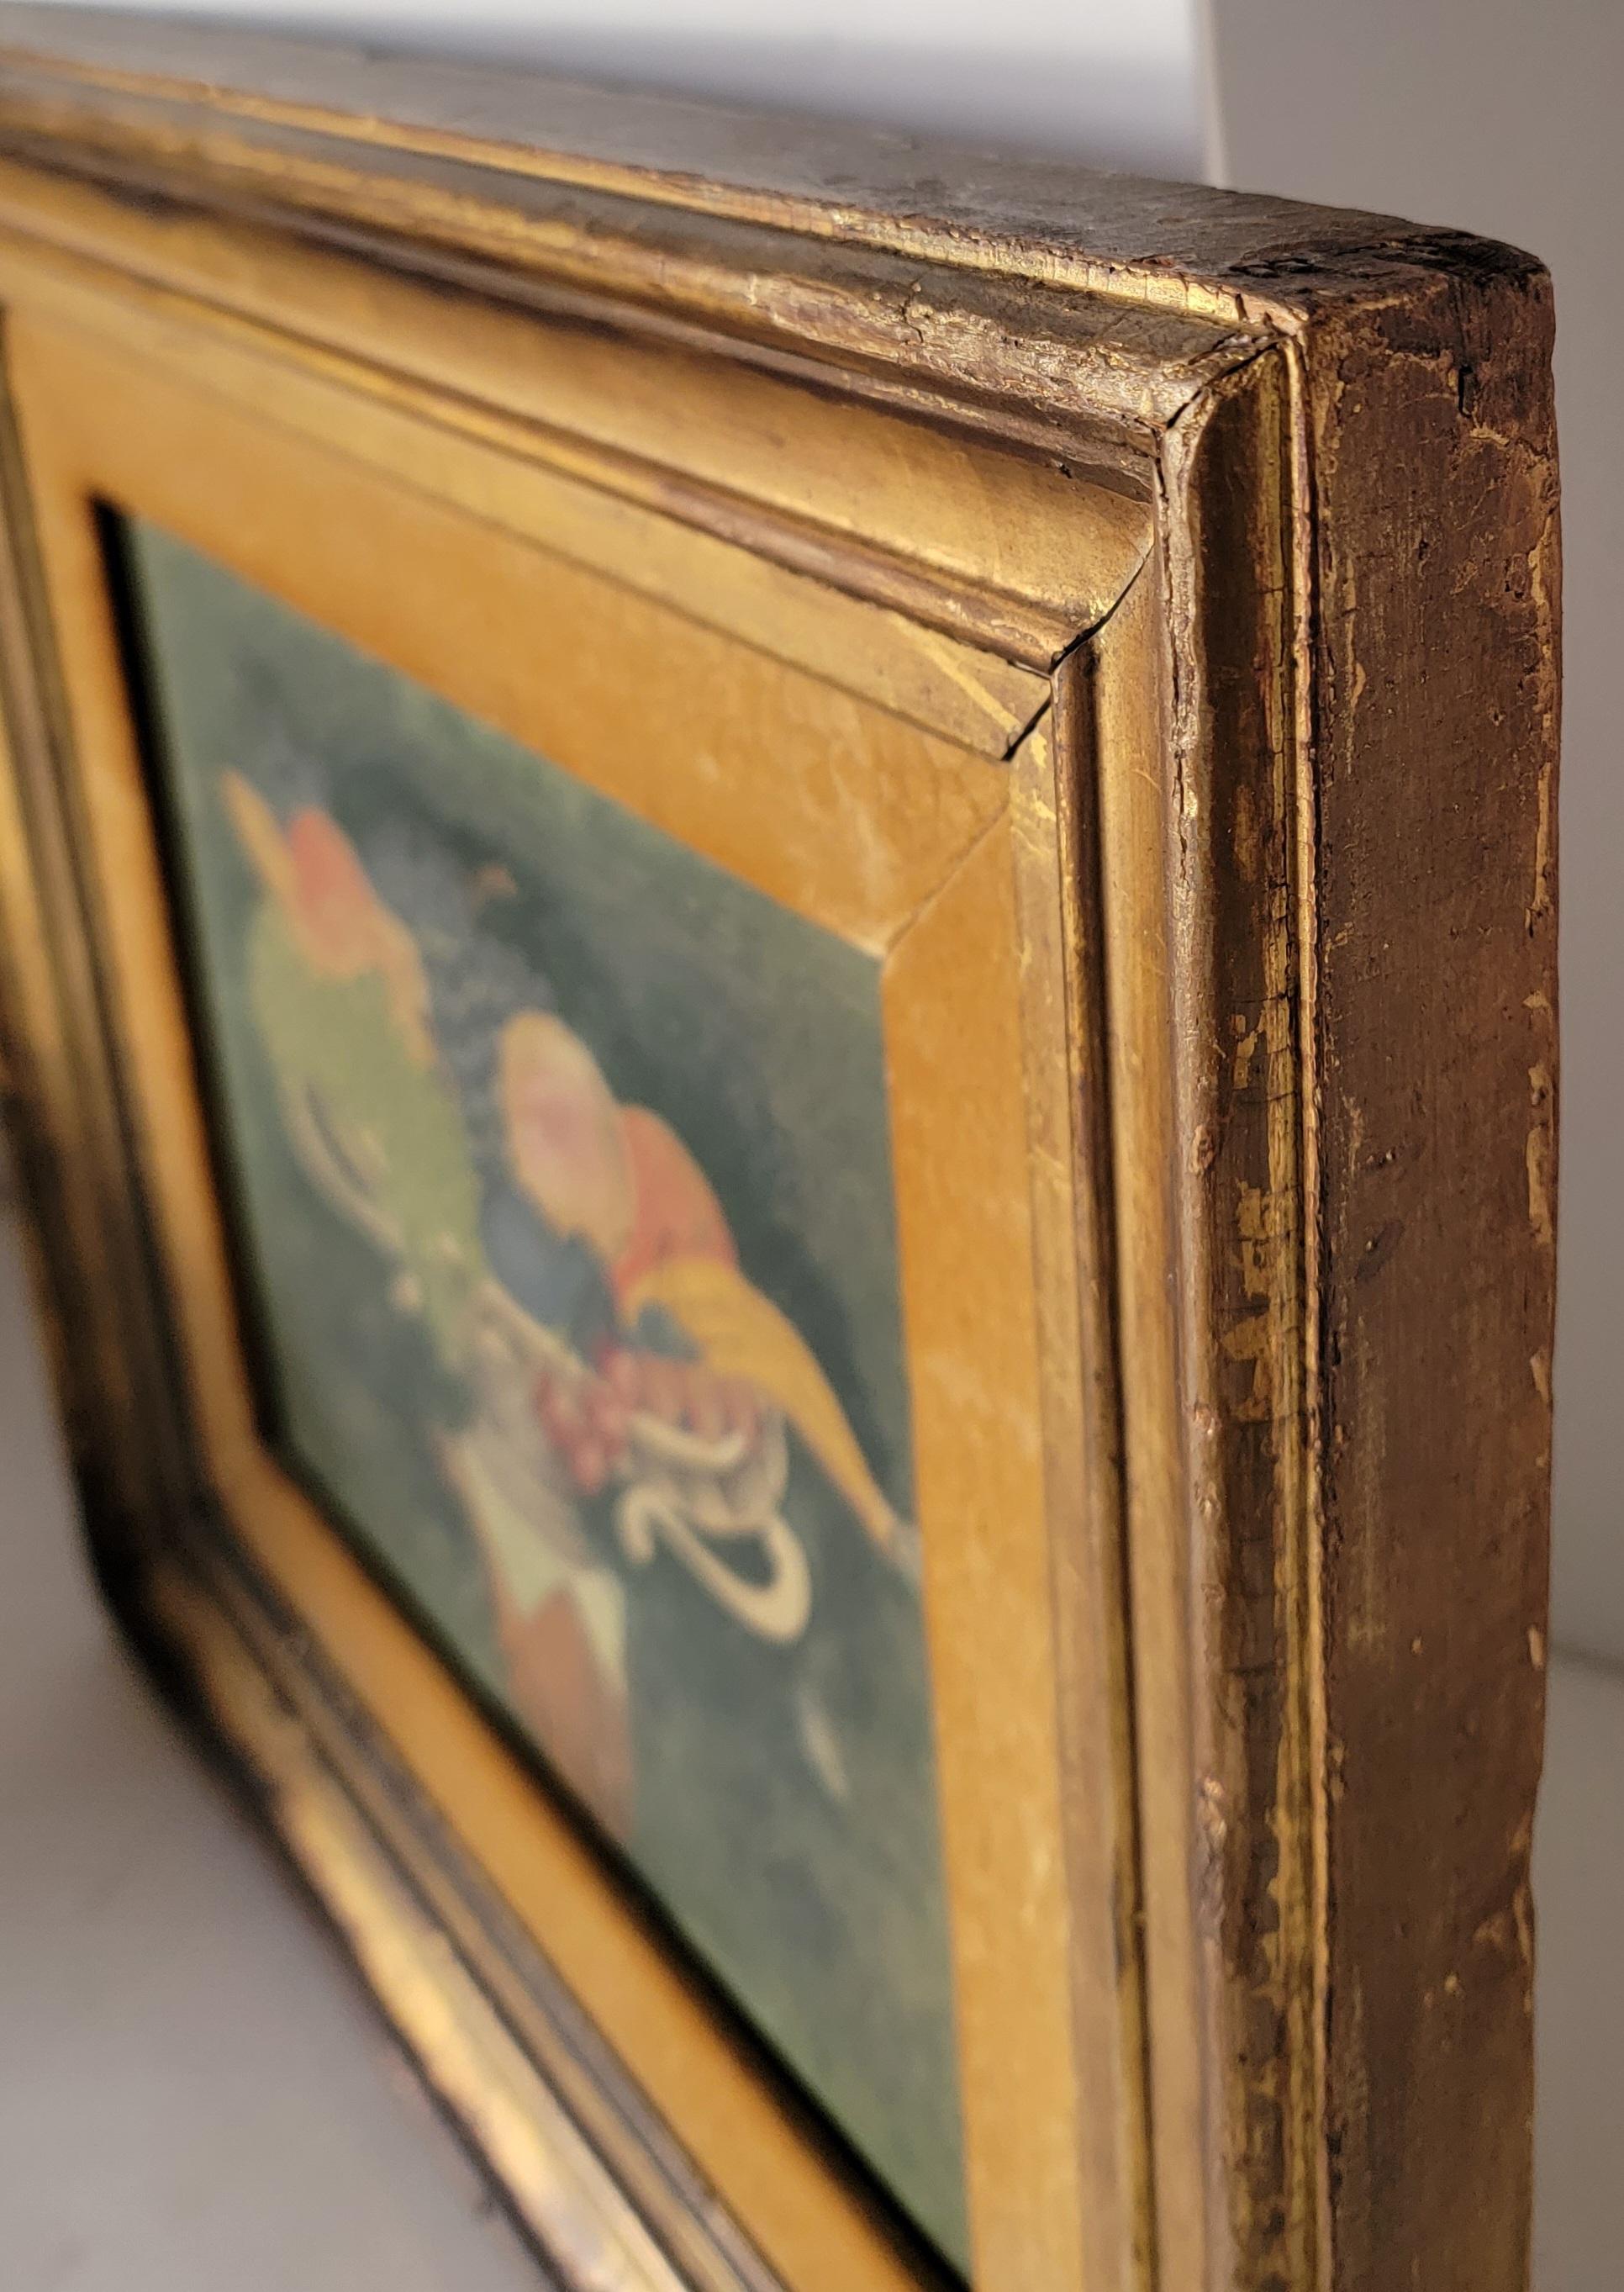 This Fine 19th c still life painting is in the original gilded frame. This Folk Art painting is in great as found condition.